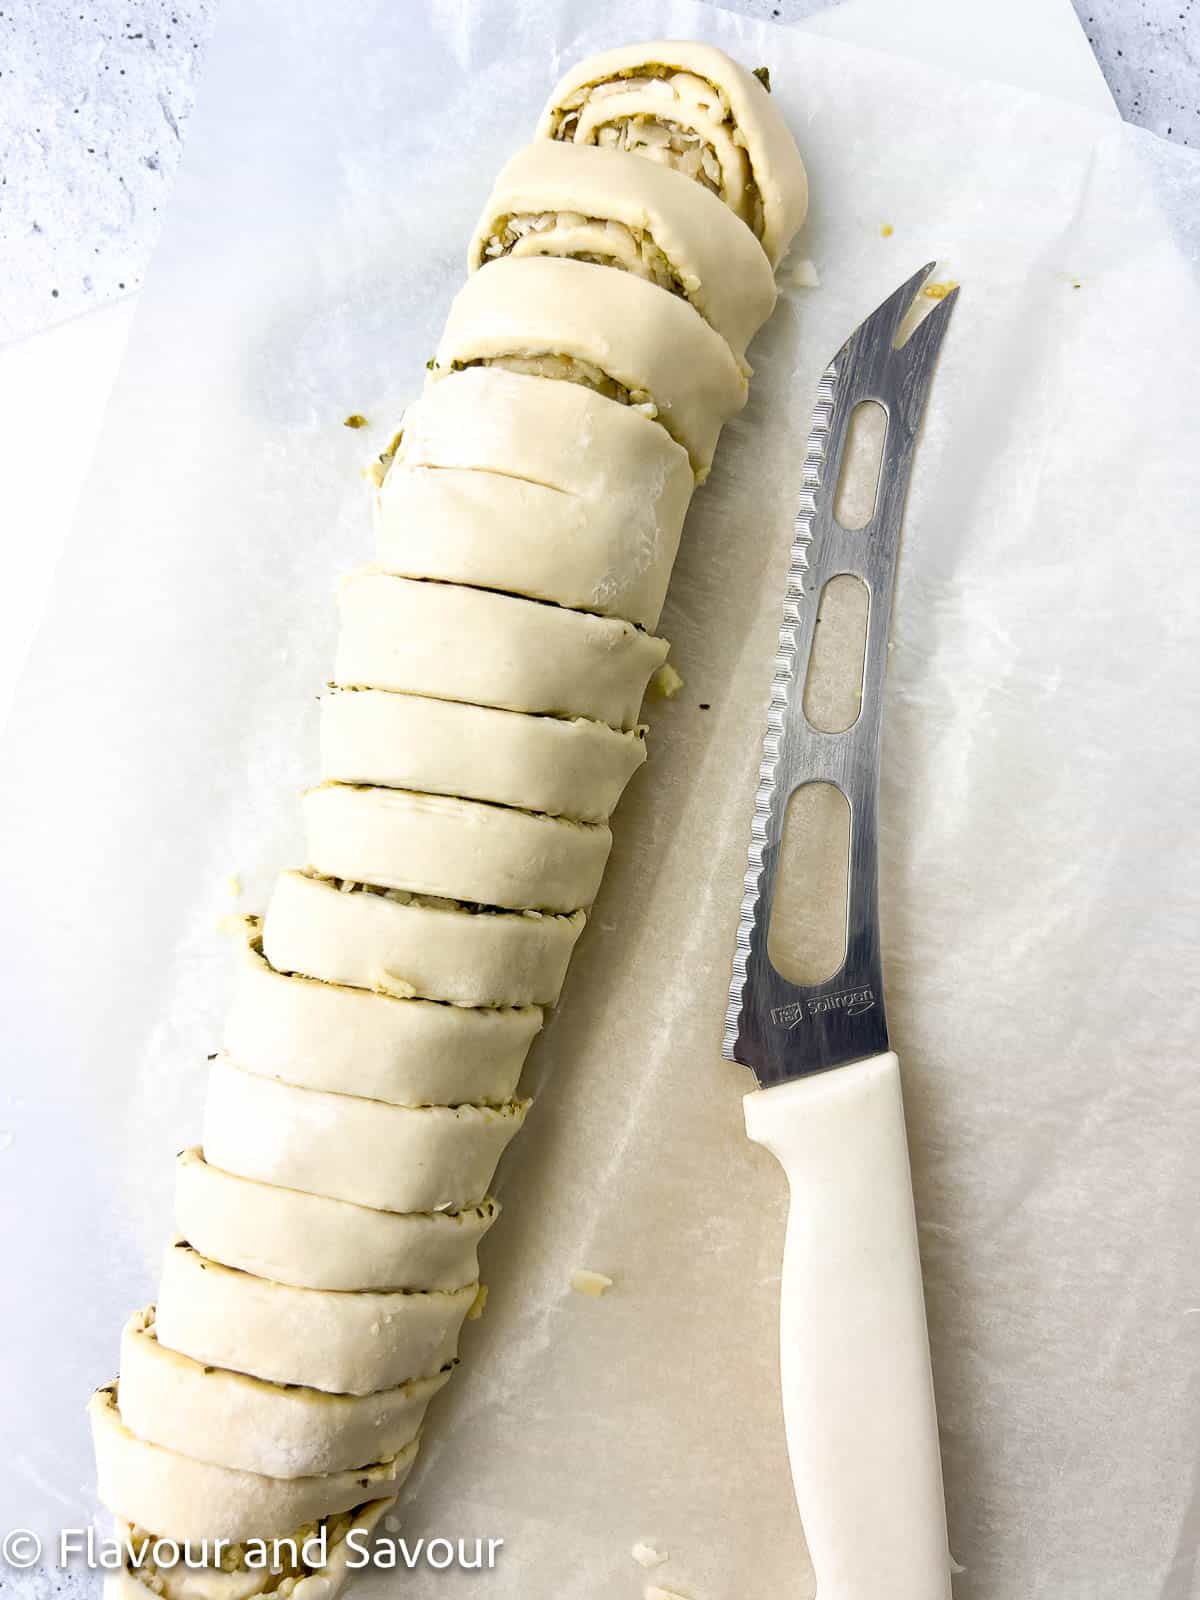 A rolled stuffed sheet of puff pastry, sliced into ½ inch slices with a knife nearby.